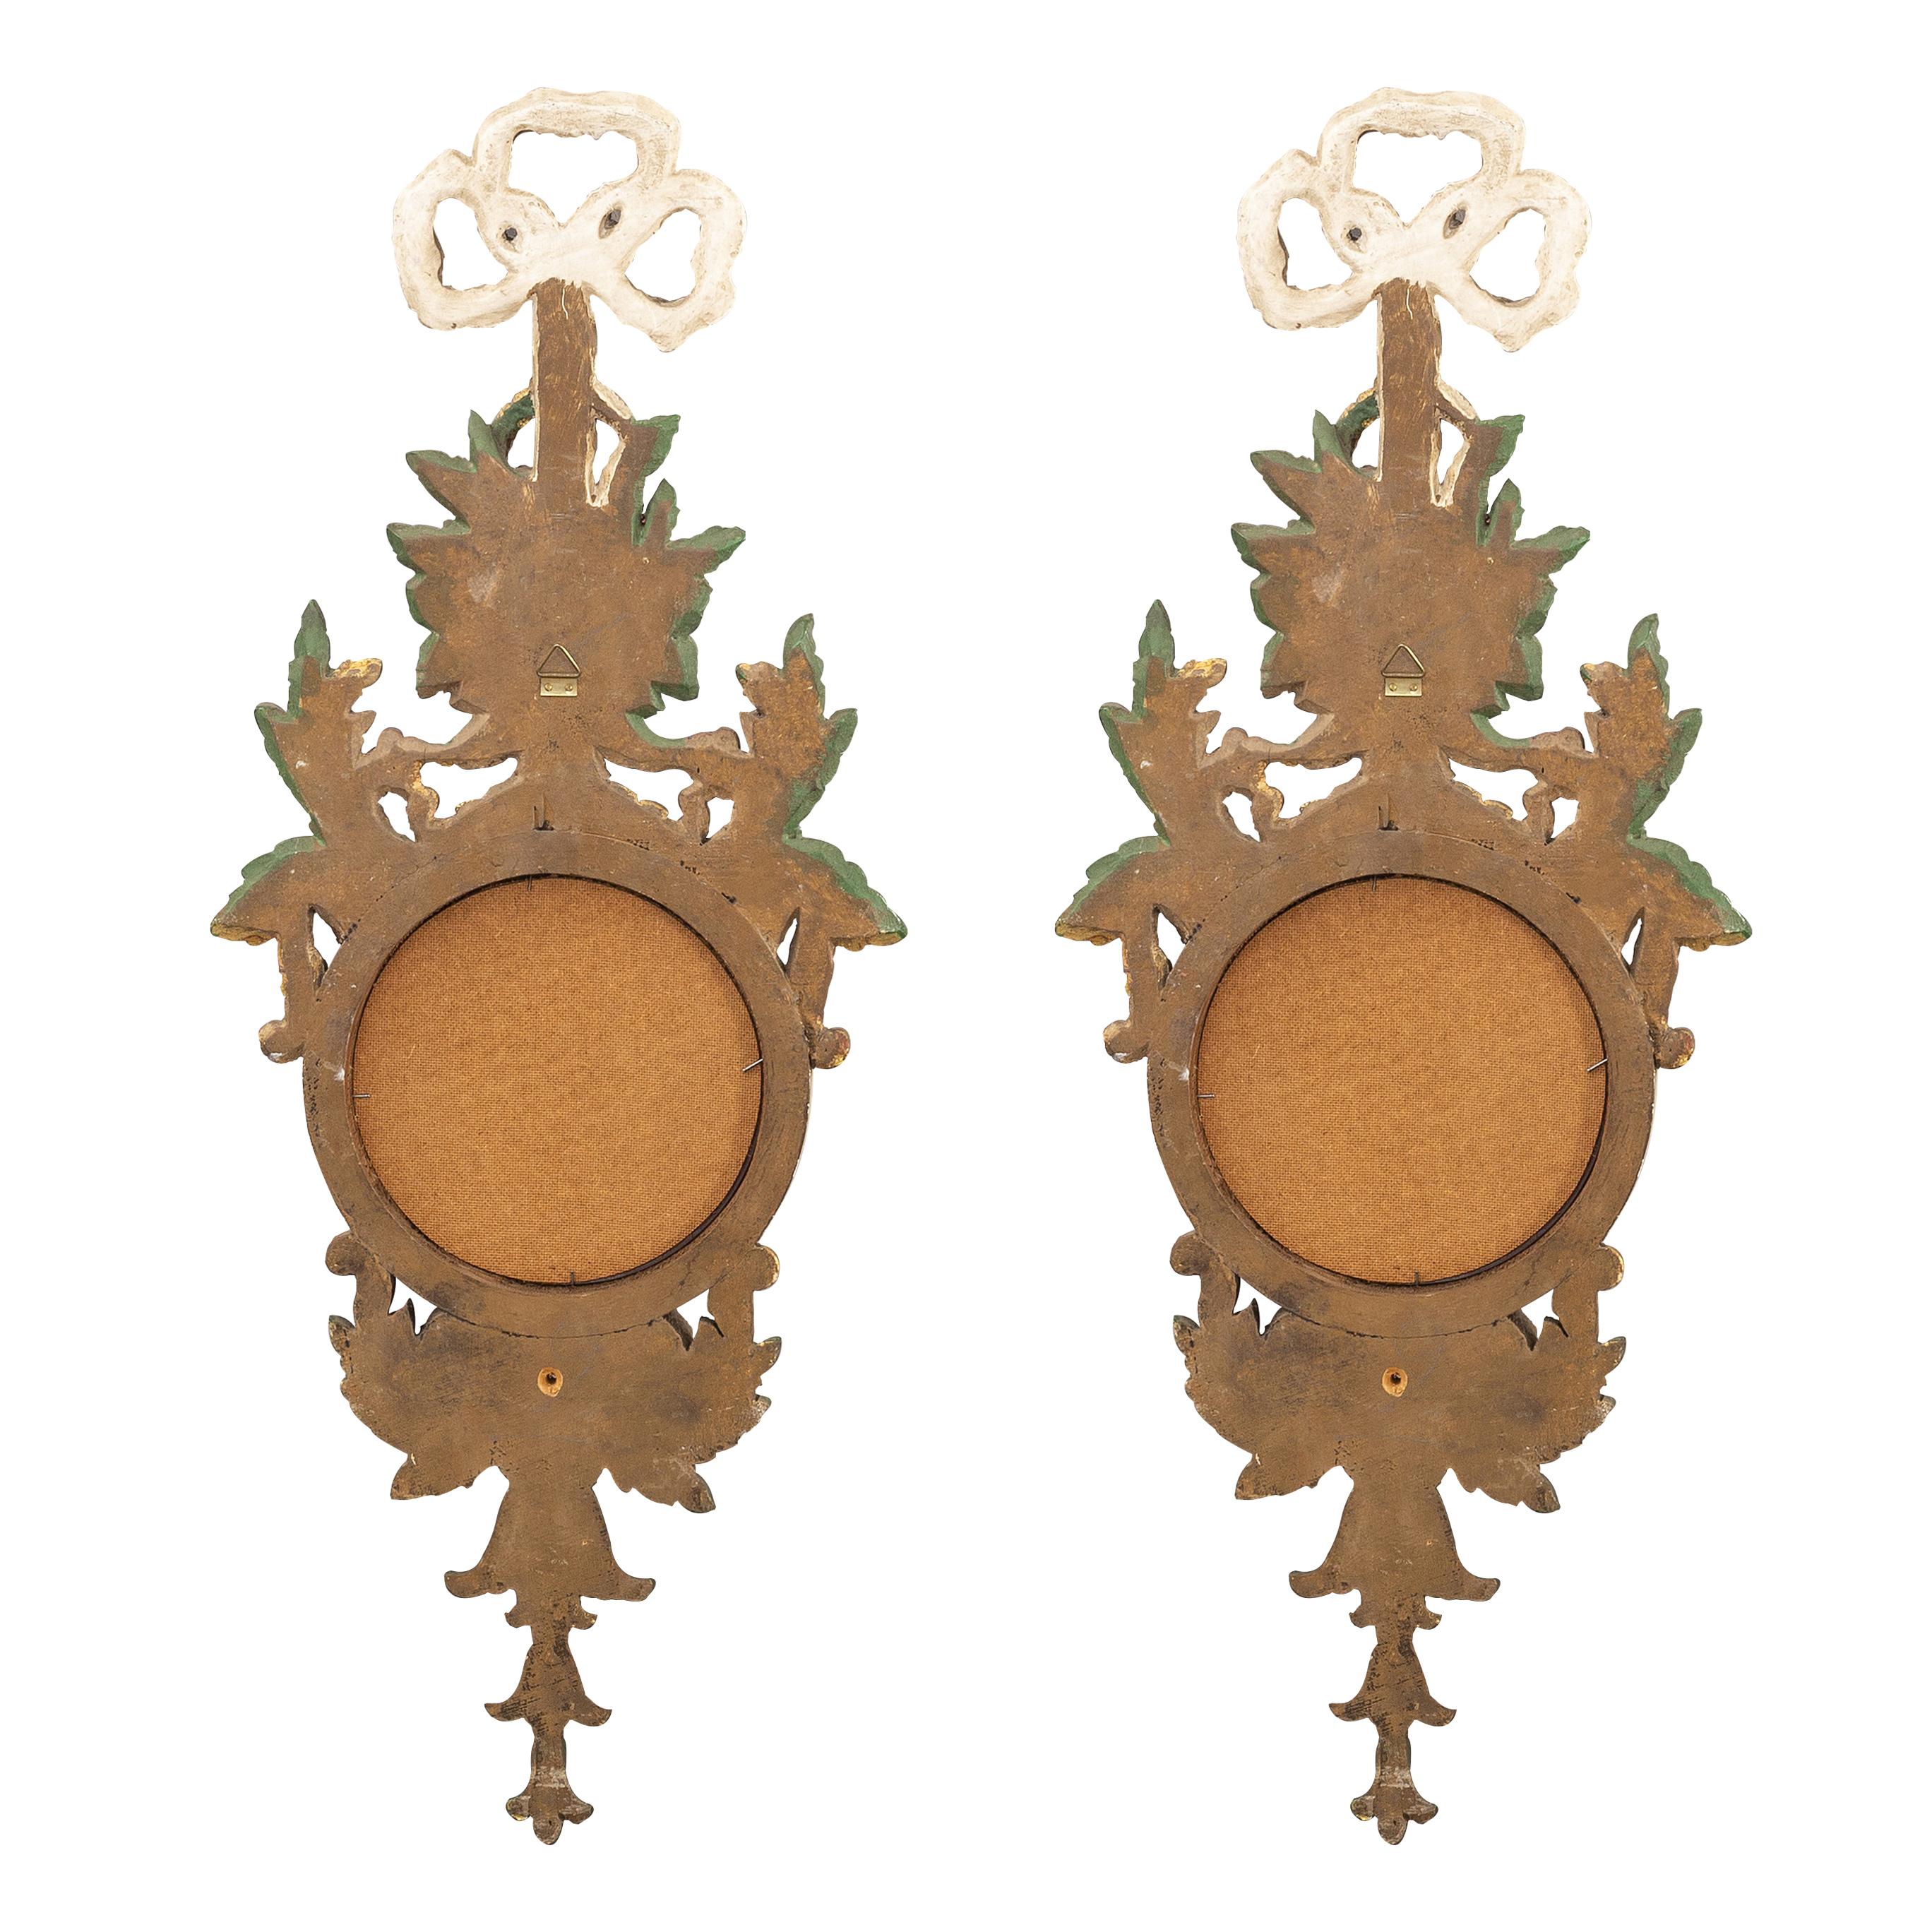 Mid-20th Century Pair of 1950s Decorative Italian Firenze Giltwood Convex Mirrored Wall Sconces